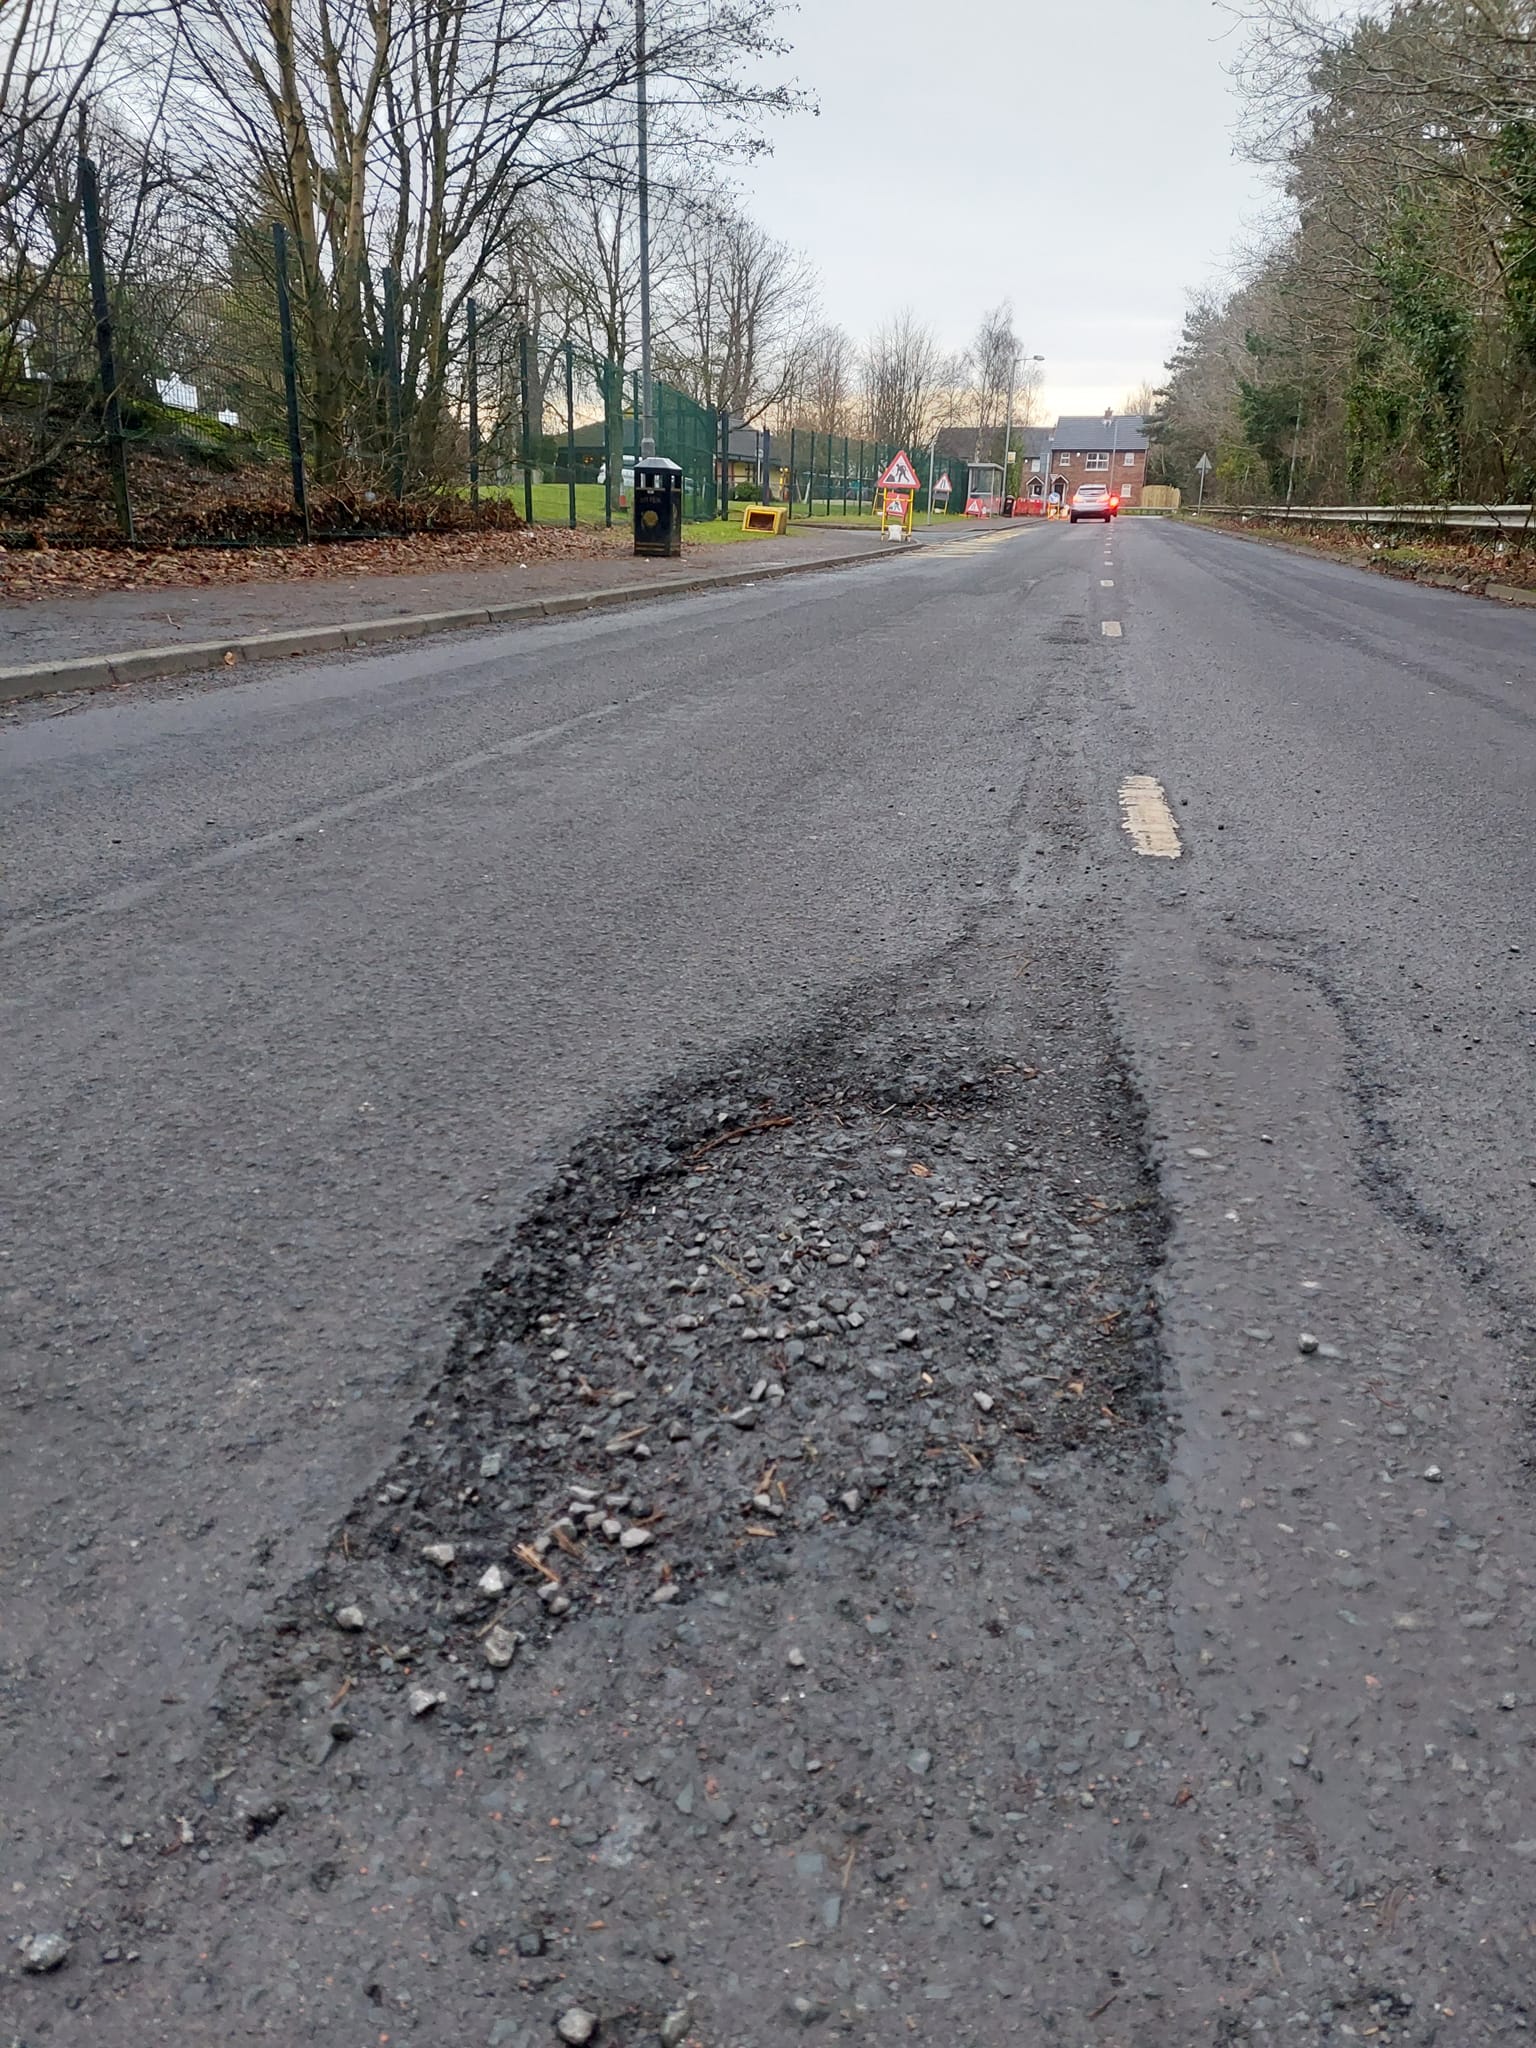 DAMAGE: PBP Councillor Michael Collins has urged DfI to carry out pothole repairs on Cherry Road as soon as possible